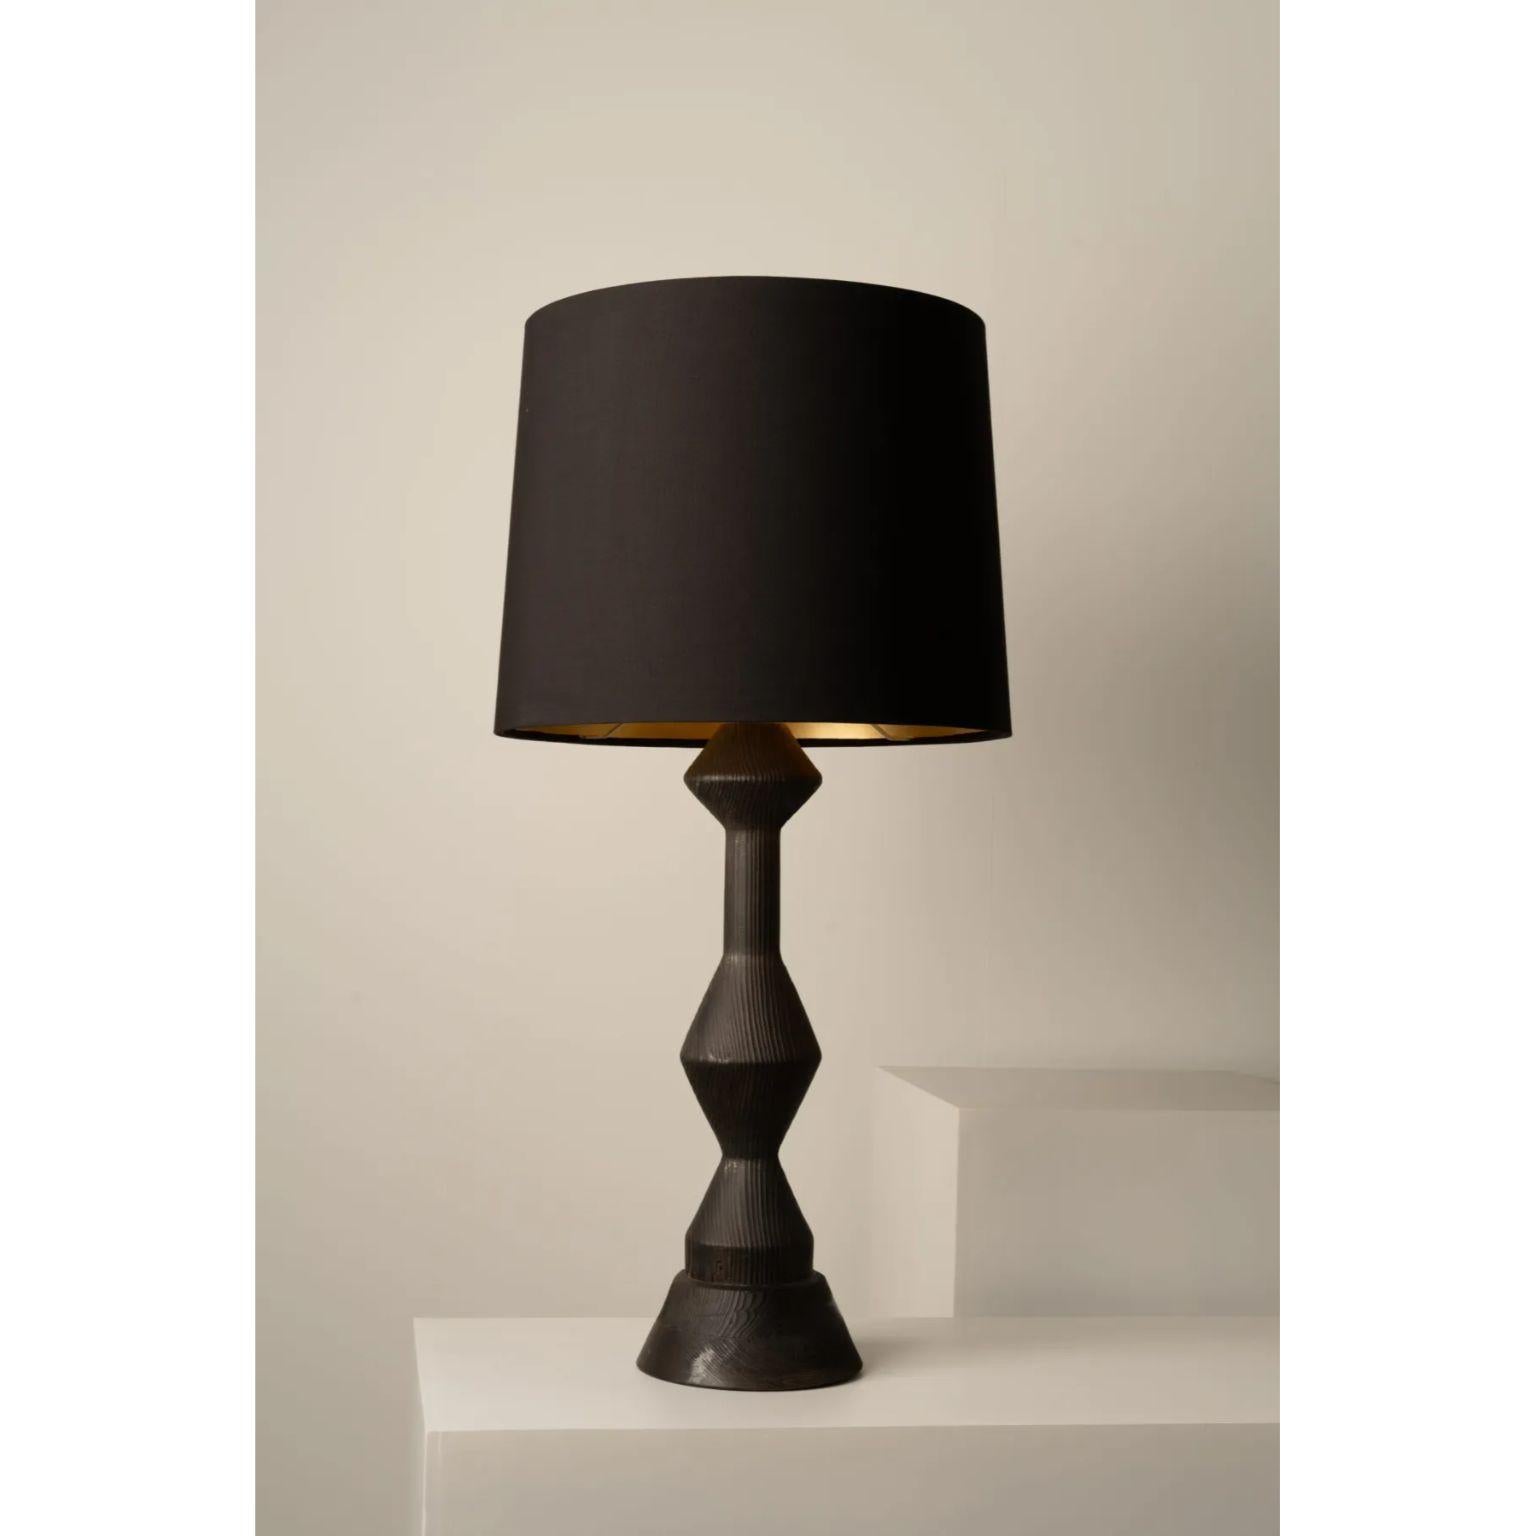 Tabachín Table Lamp by Isabel Moncada
Dimensions: Ø 51 x H 99 cm.
Materials: Fiberglass, linen, gold and turned pine wood.

The silhouette of Tabachín is categorical, straight lines that make up black cones and diamond shapes. The deep graphite